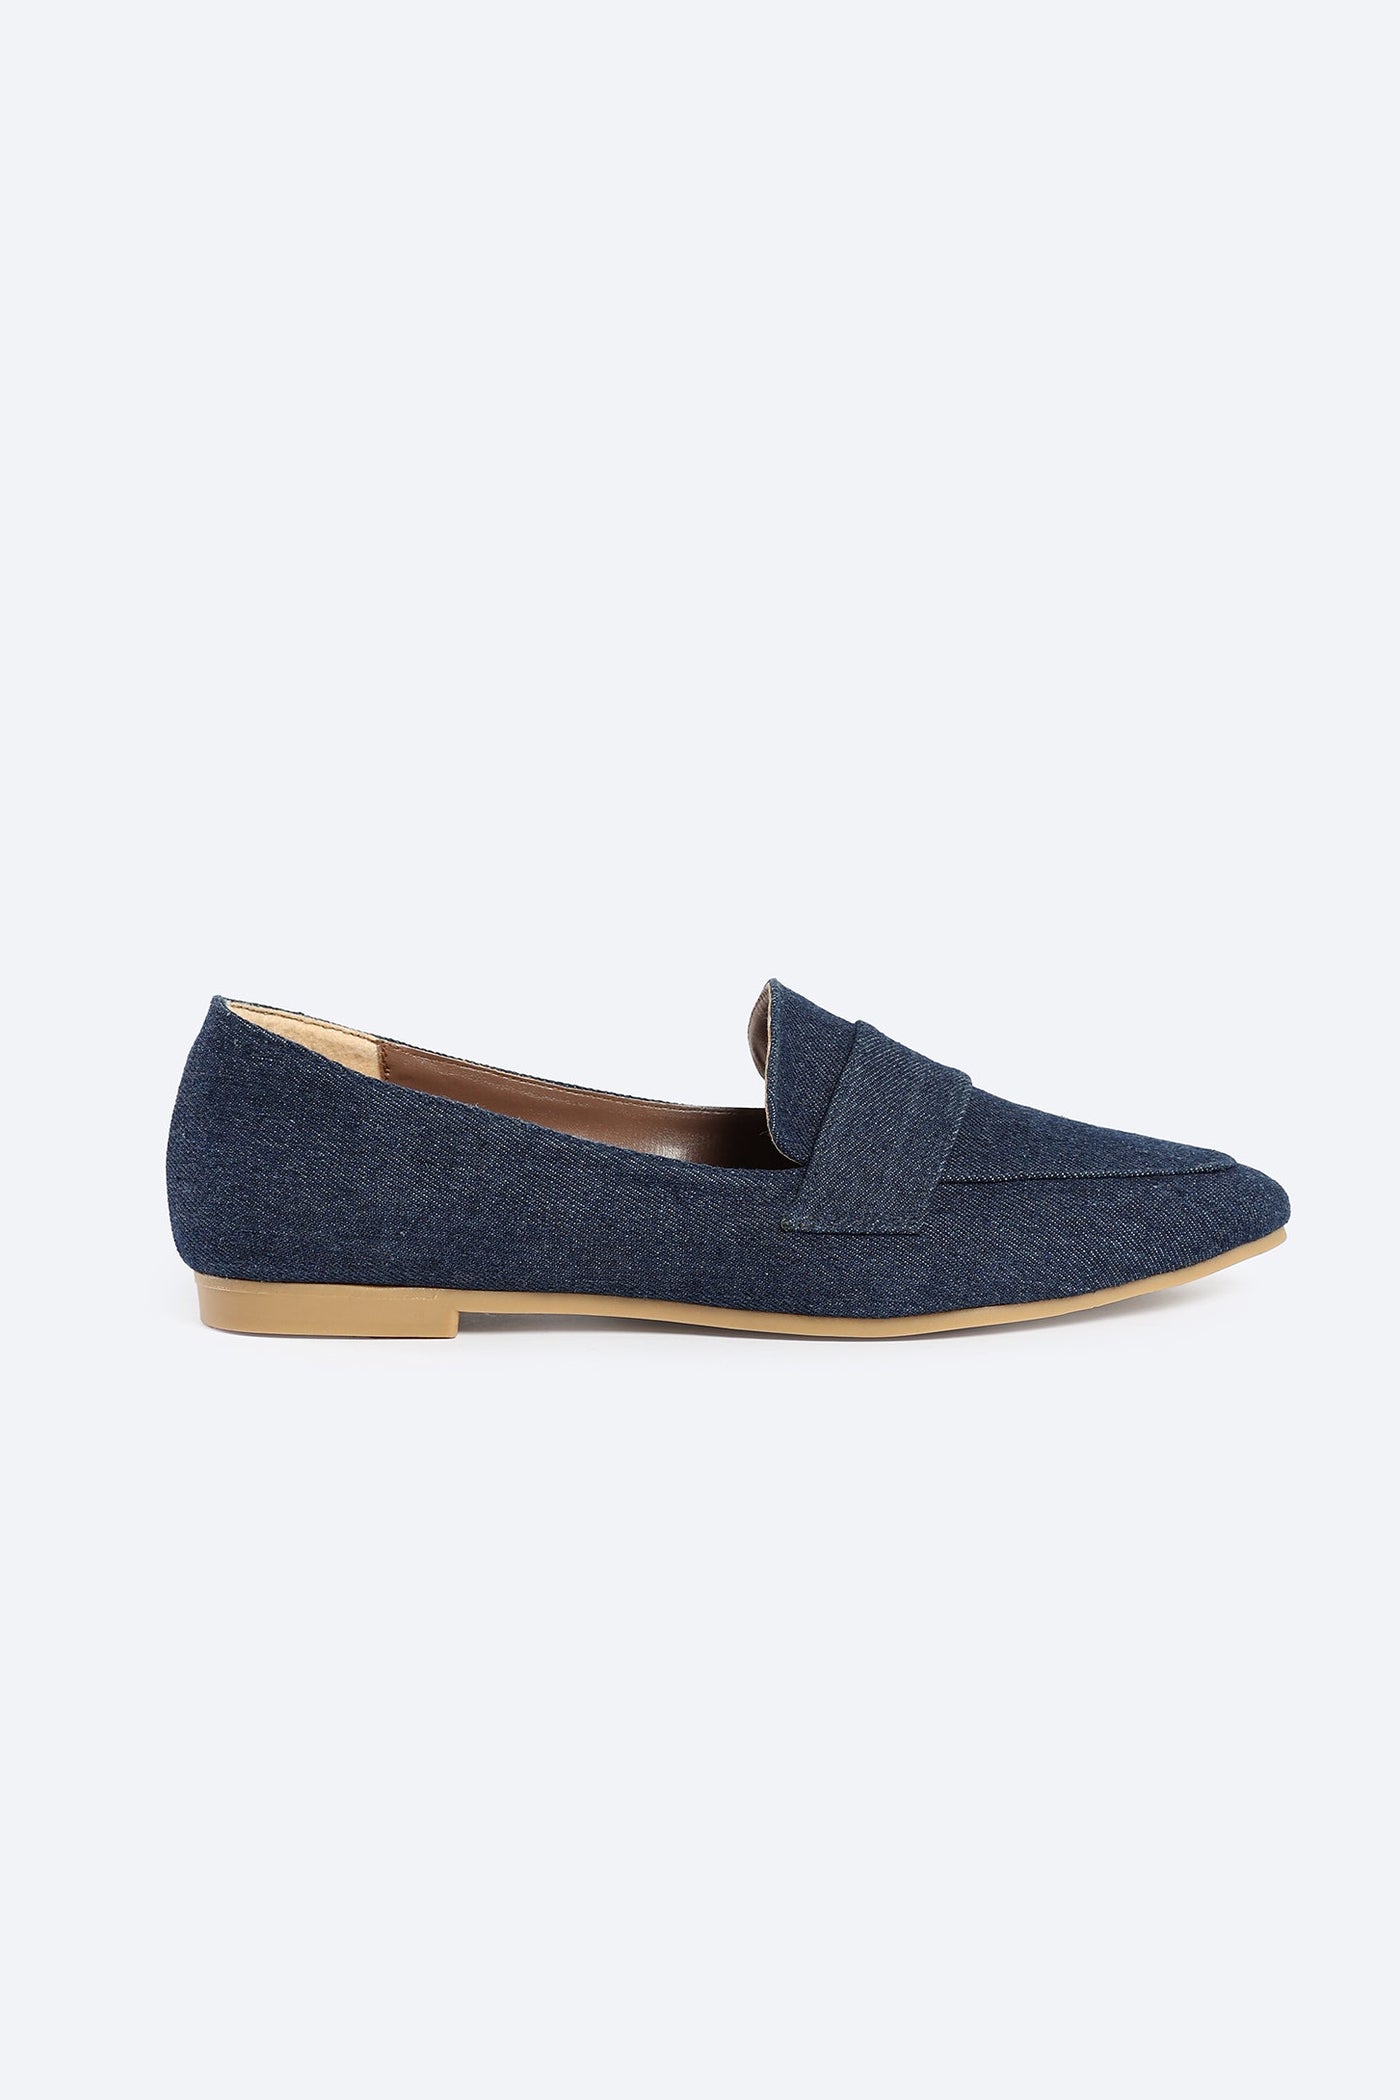 Luxe Look Loafers - Navy